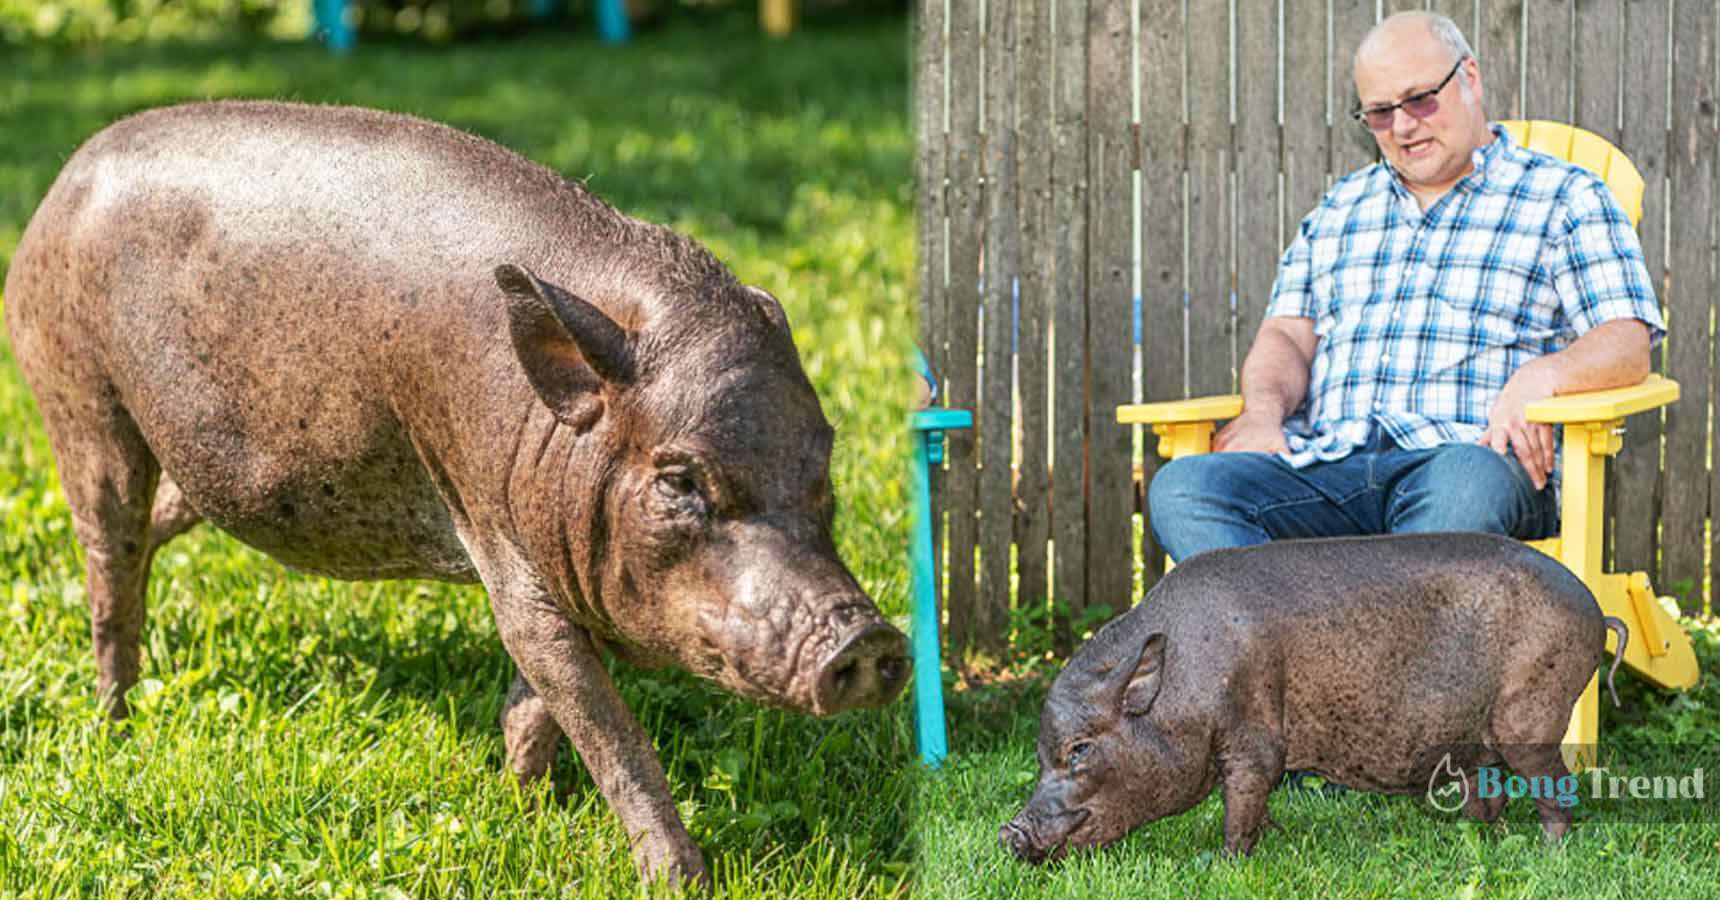 23 year old house pig made Guinness Book of World Record